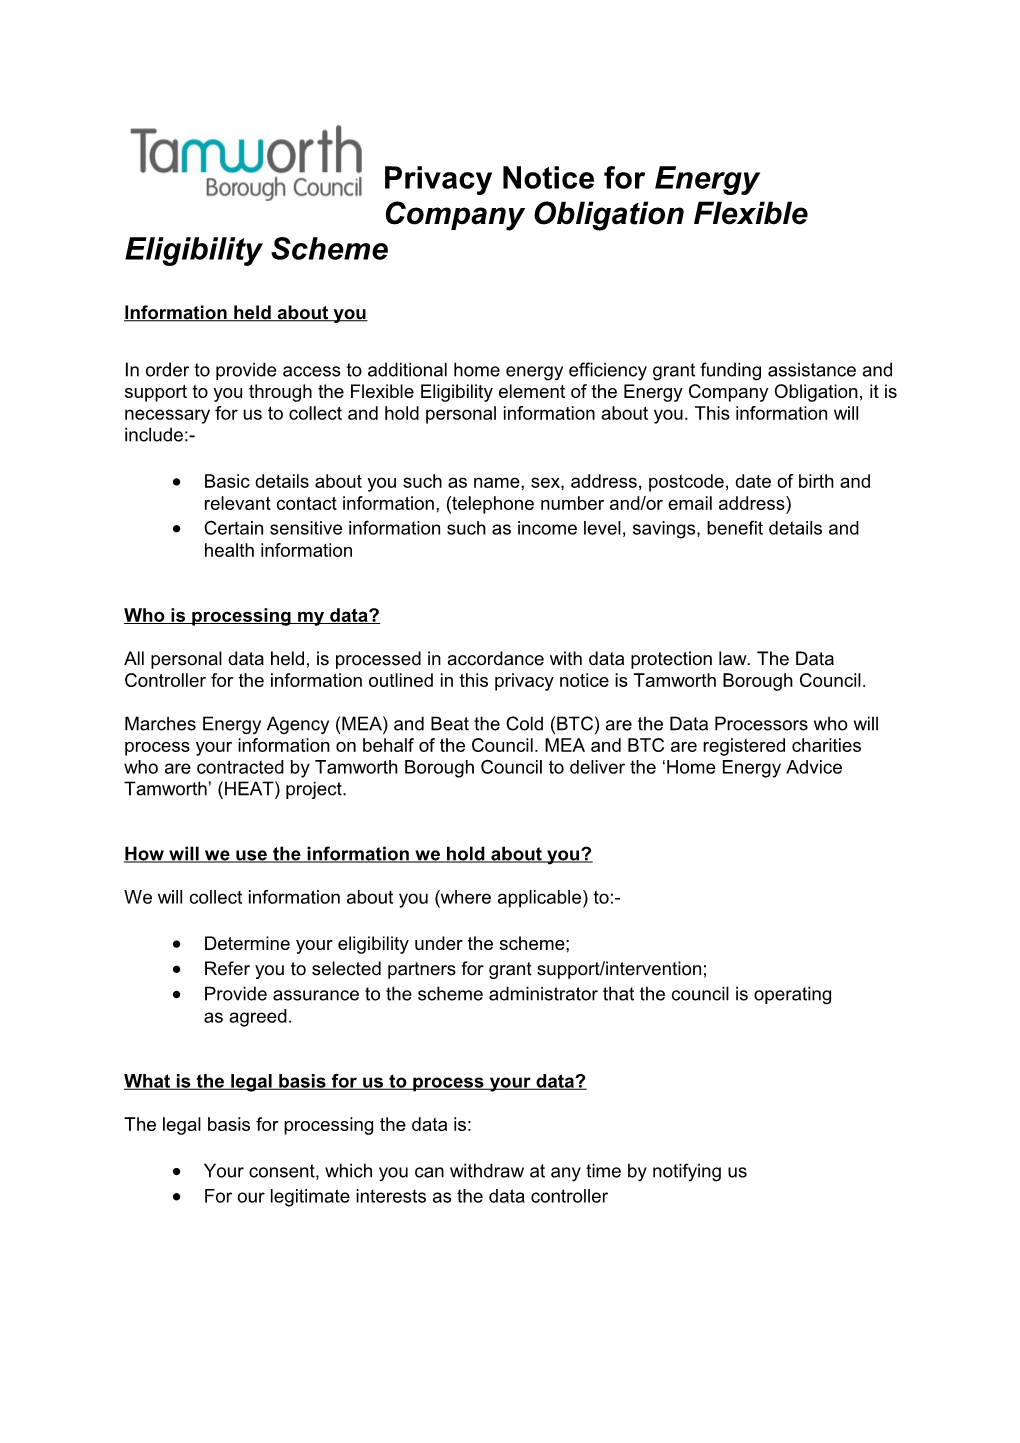 Privacy Notice for Energy Company Obligation Flexible Eligibility Scheme